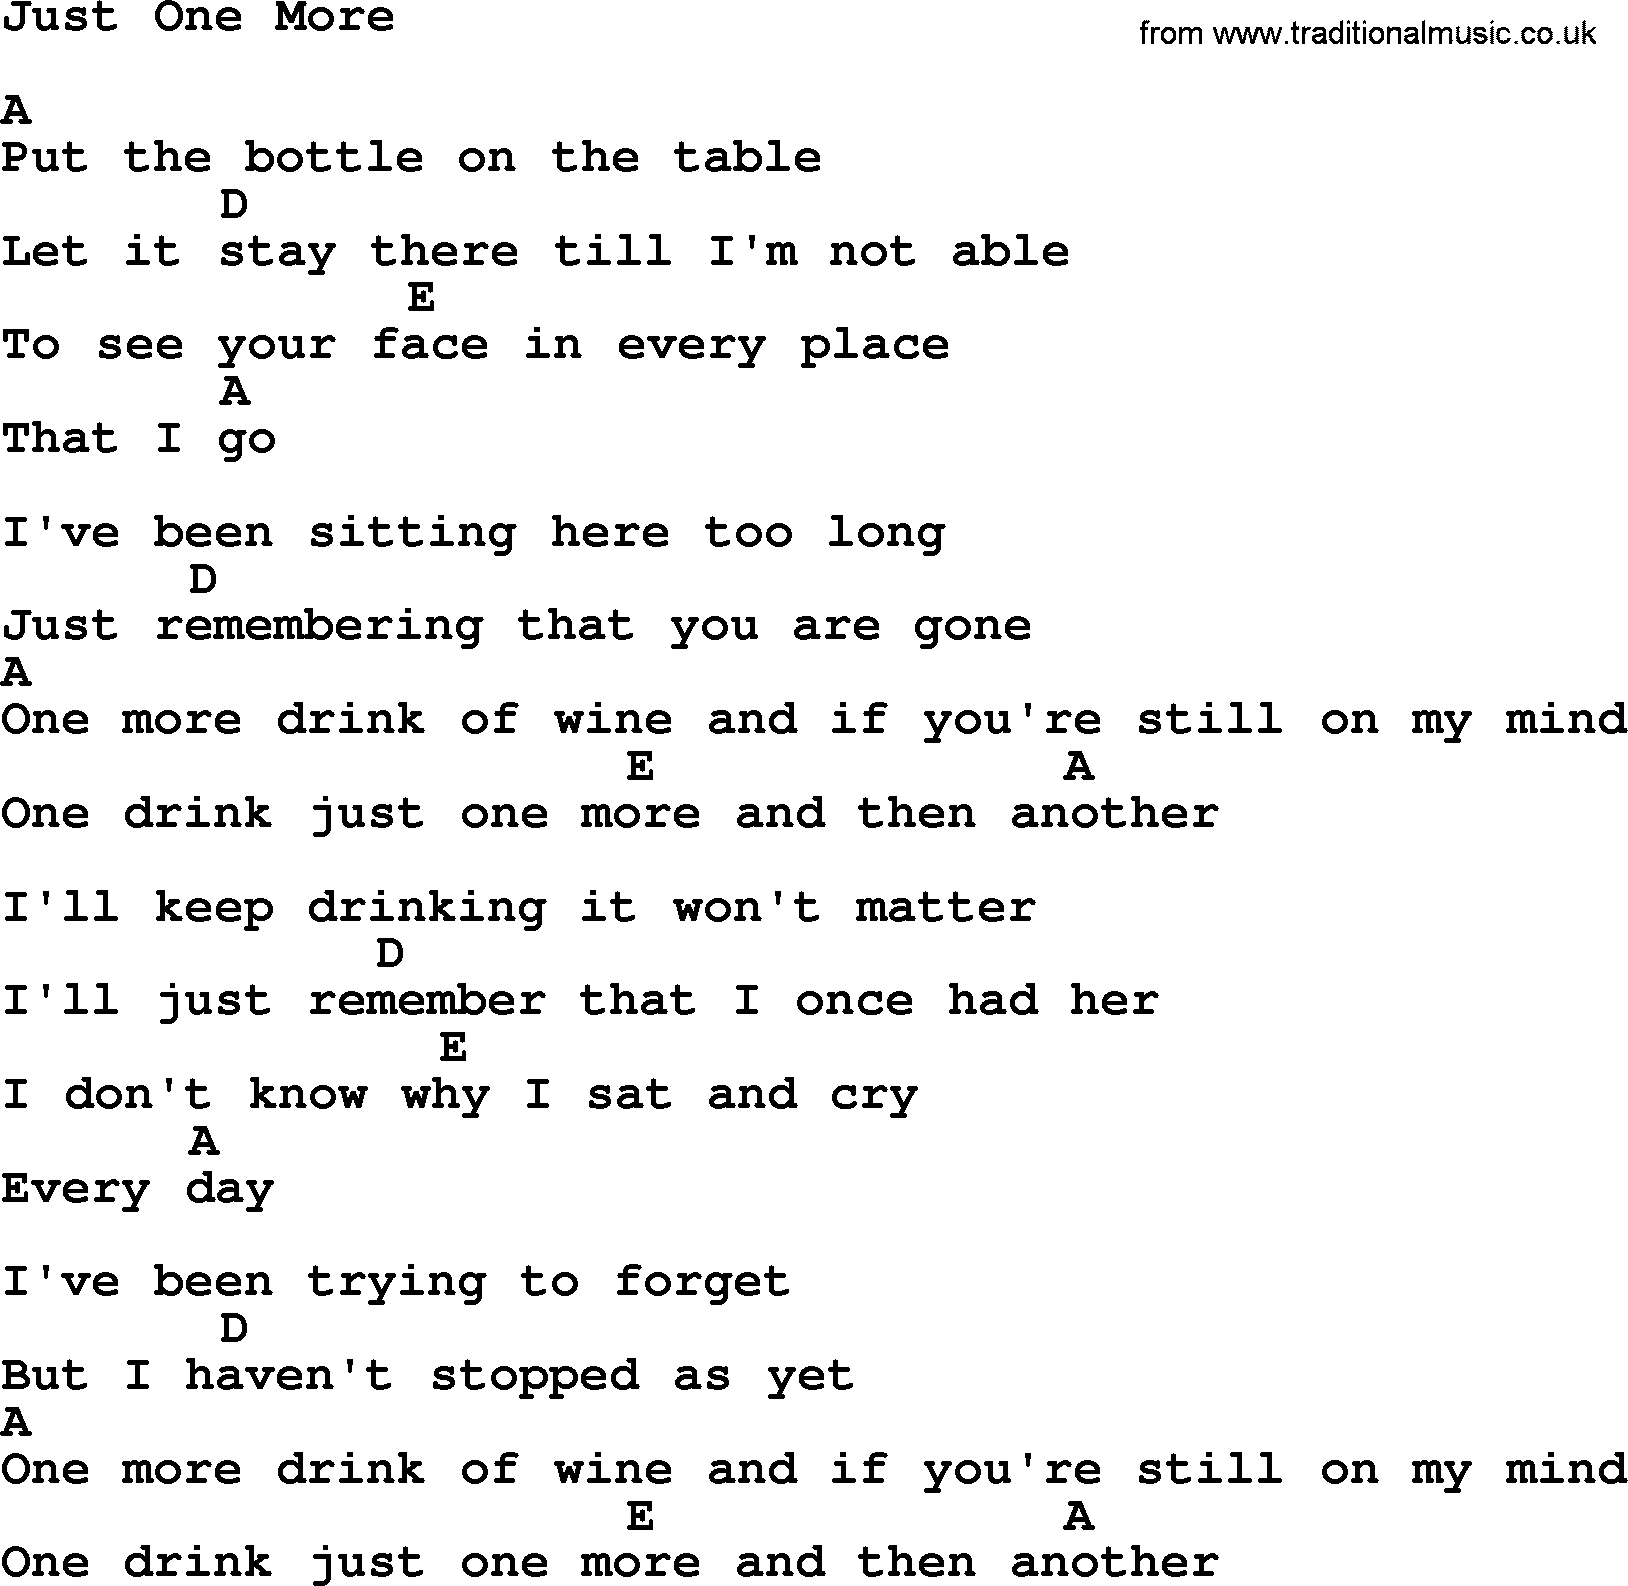 Johnny Cash song Just One More, lyrics and chords